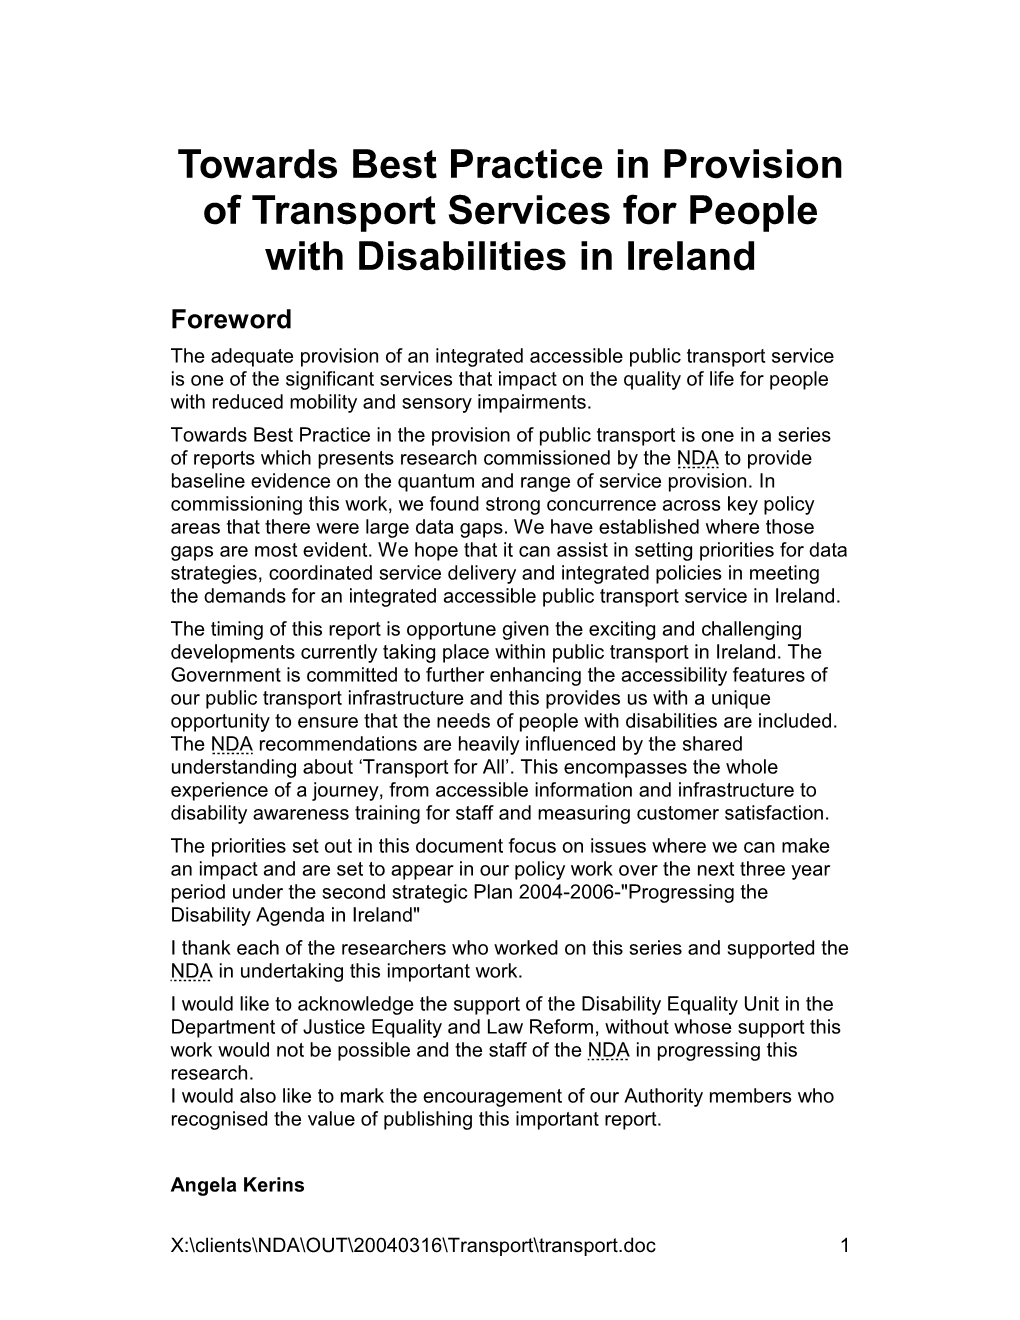 Towards Best Practice in Provision of Transport Services for People with Disabilities in Ireland